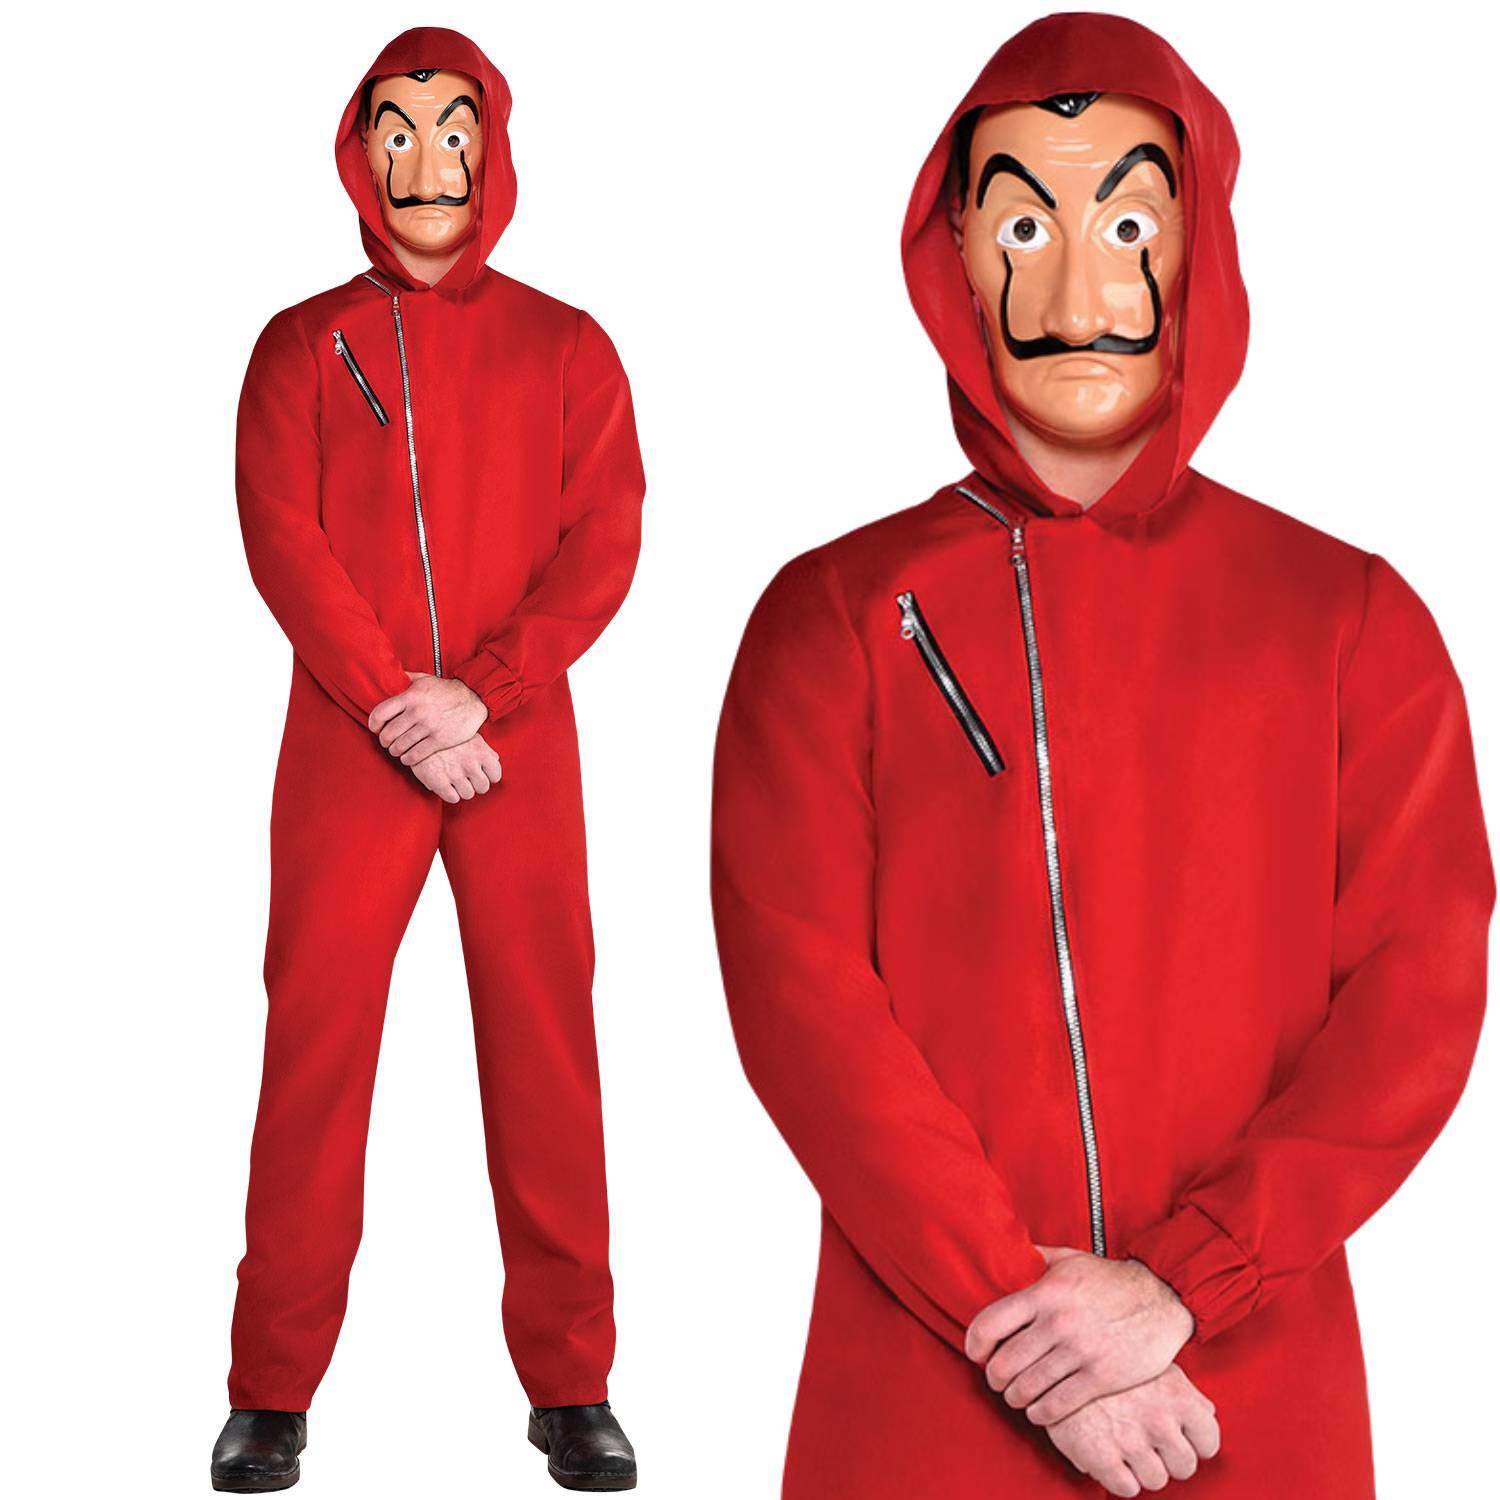 Licensed Money Heist Costume for Adults by Amscan 9907084 available here at Karnival Costumes online party shop